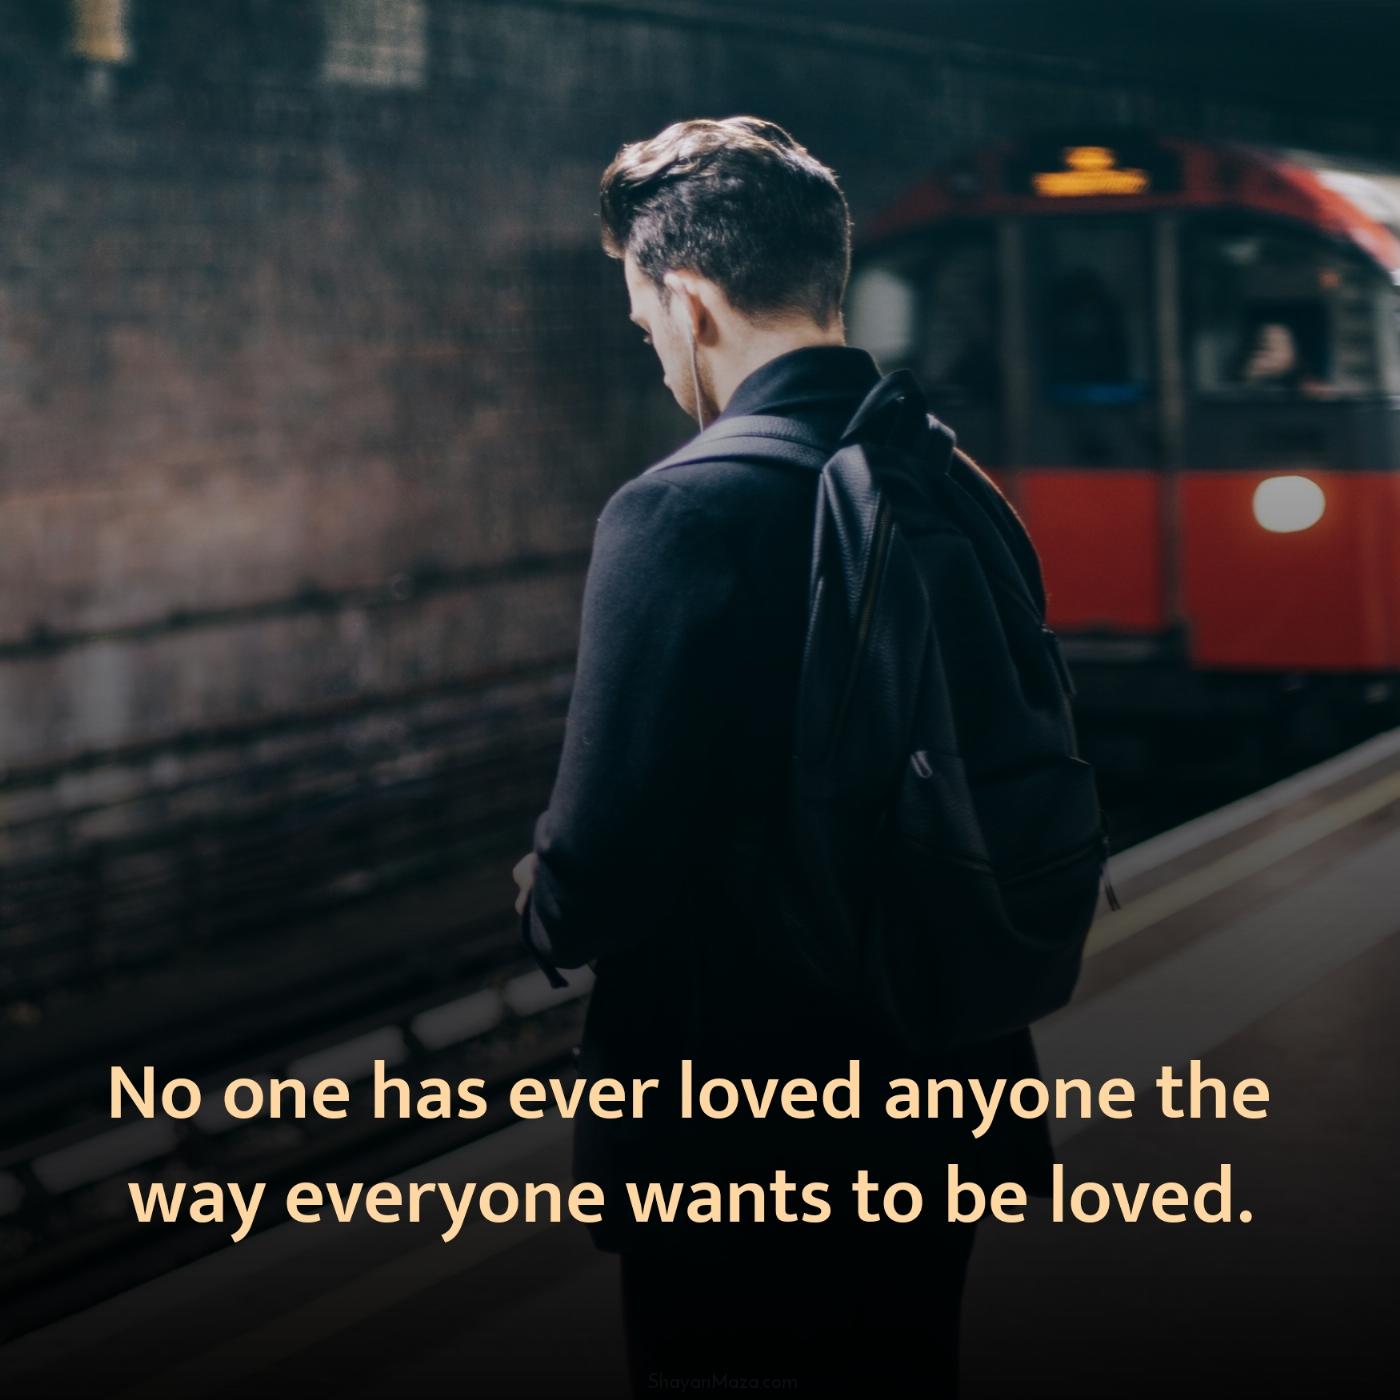 No one has ever loved anyone the way everyone